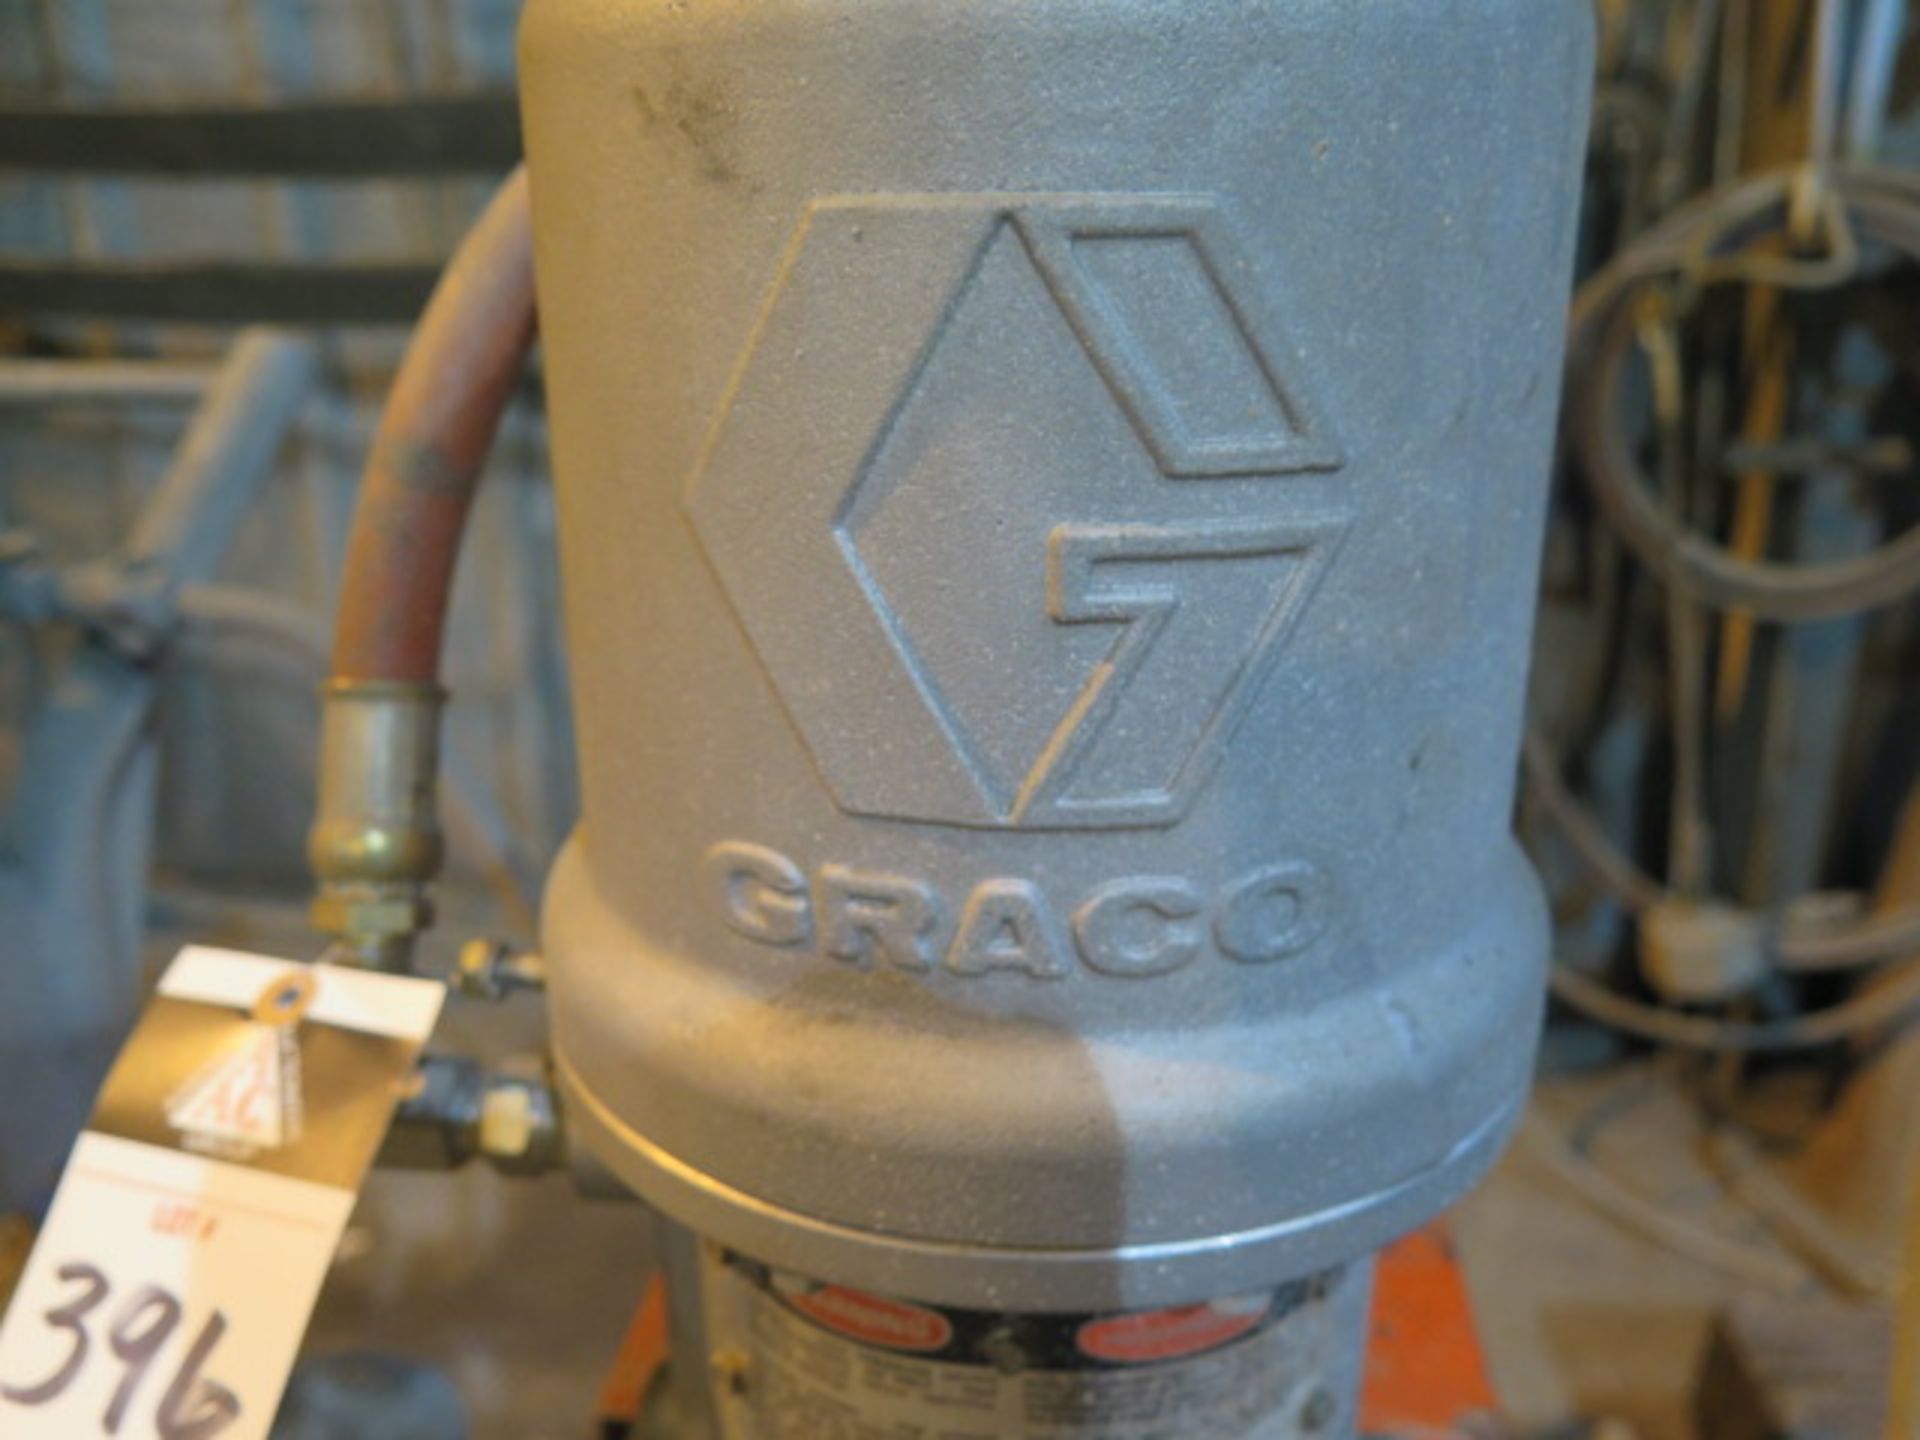 Graco mdl.207-352 Paint Sprayer - Image 4 of 4